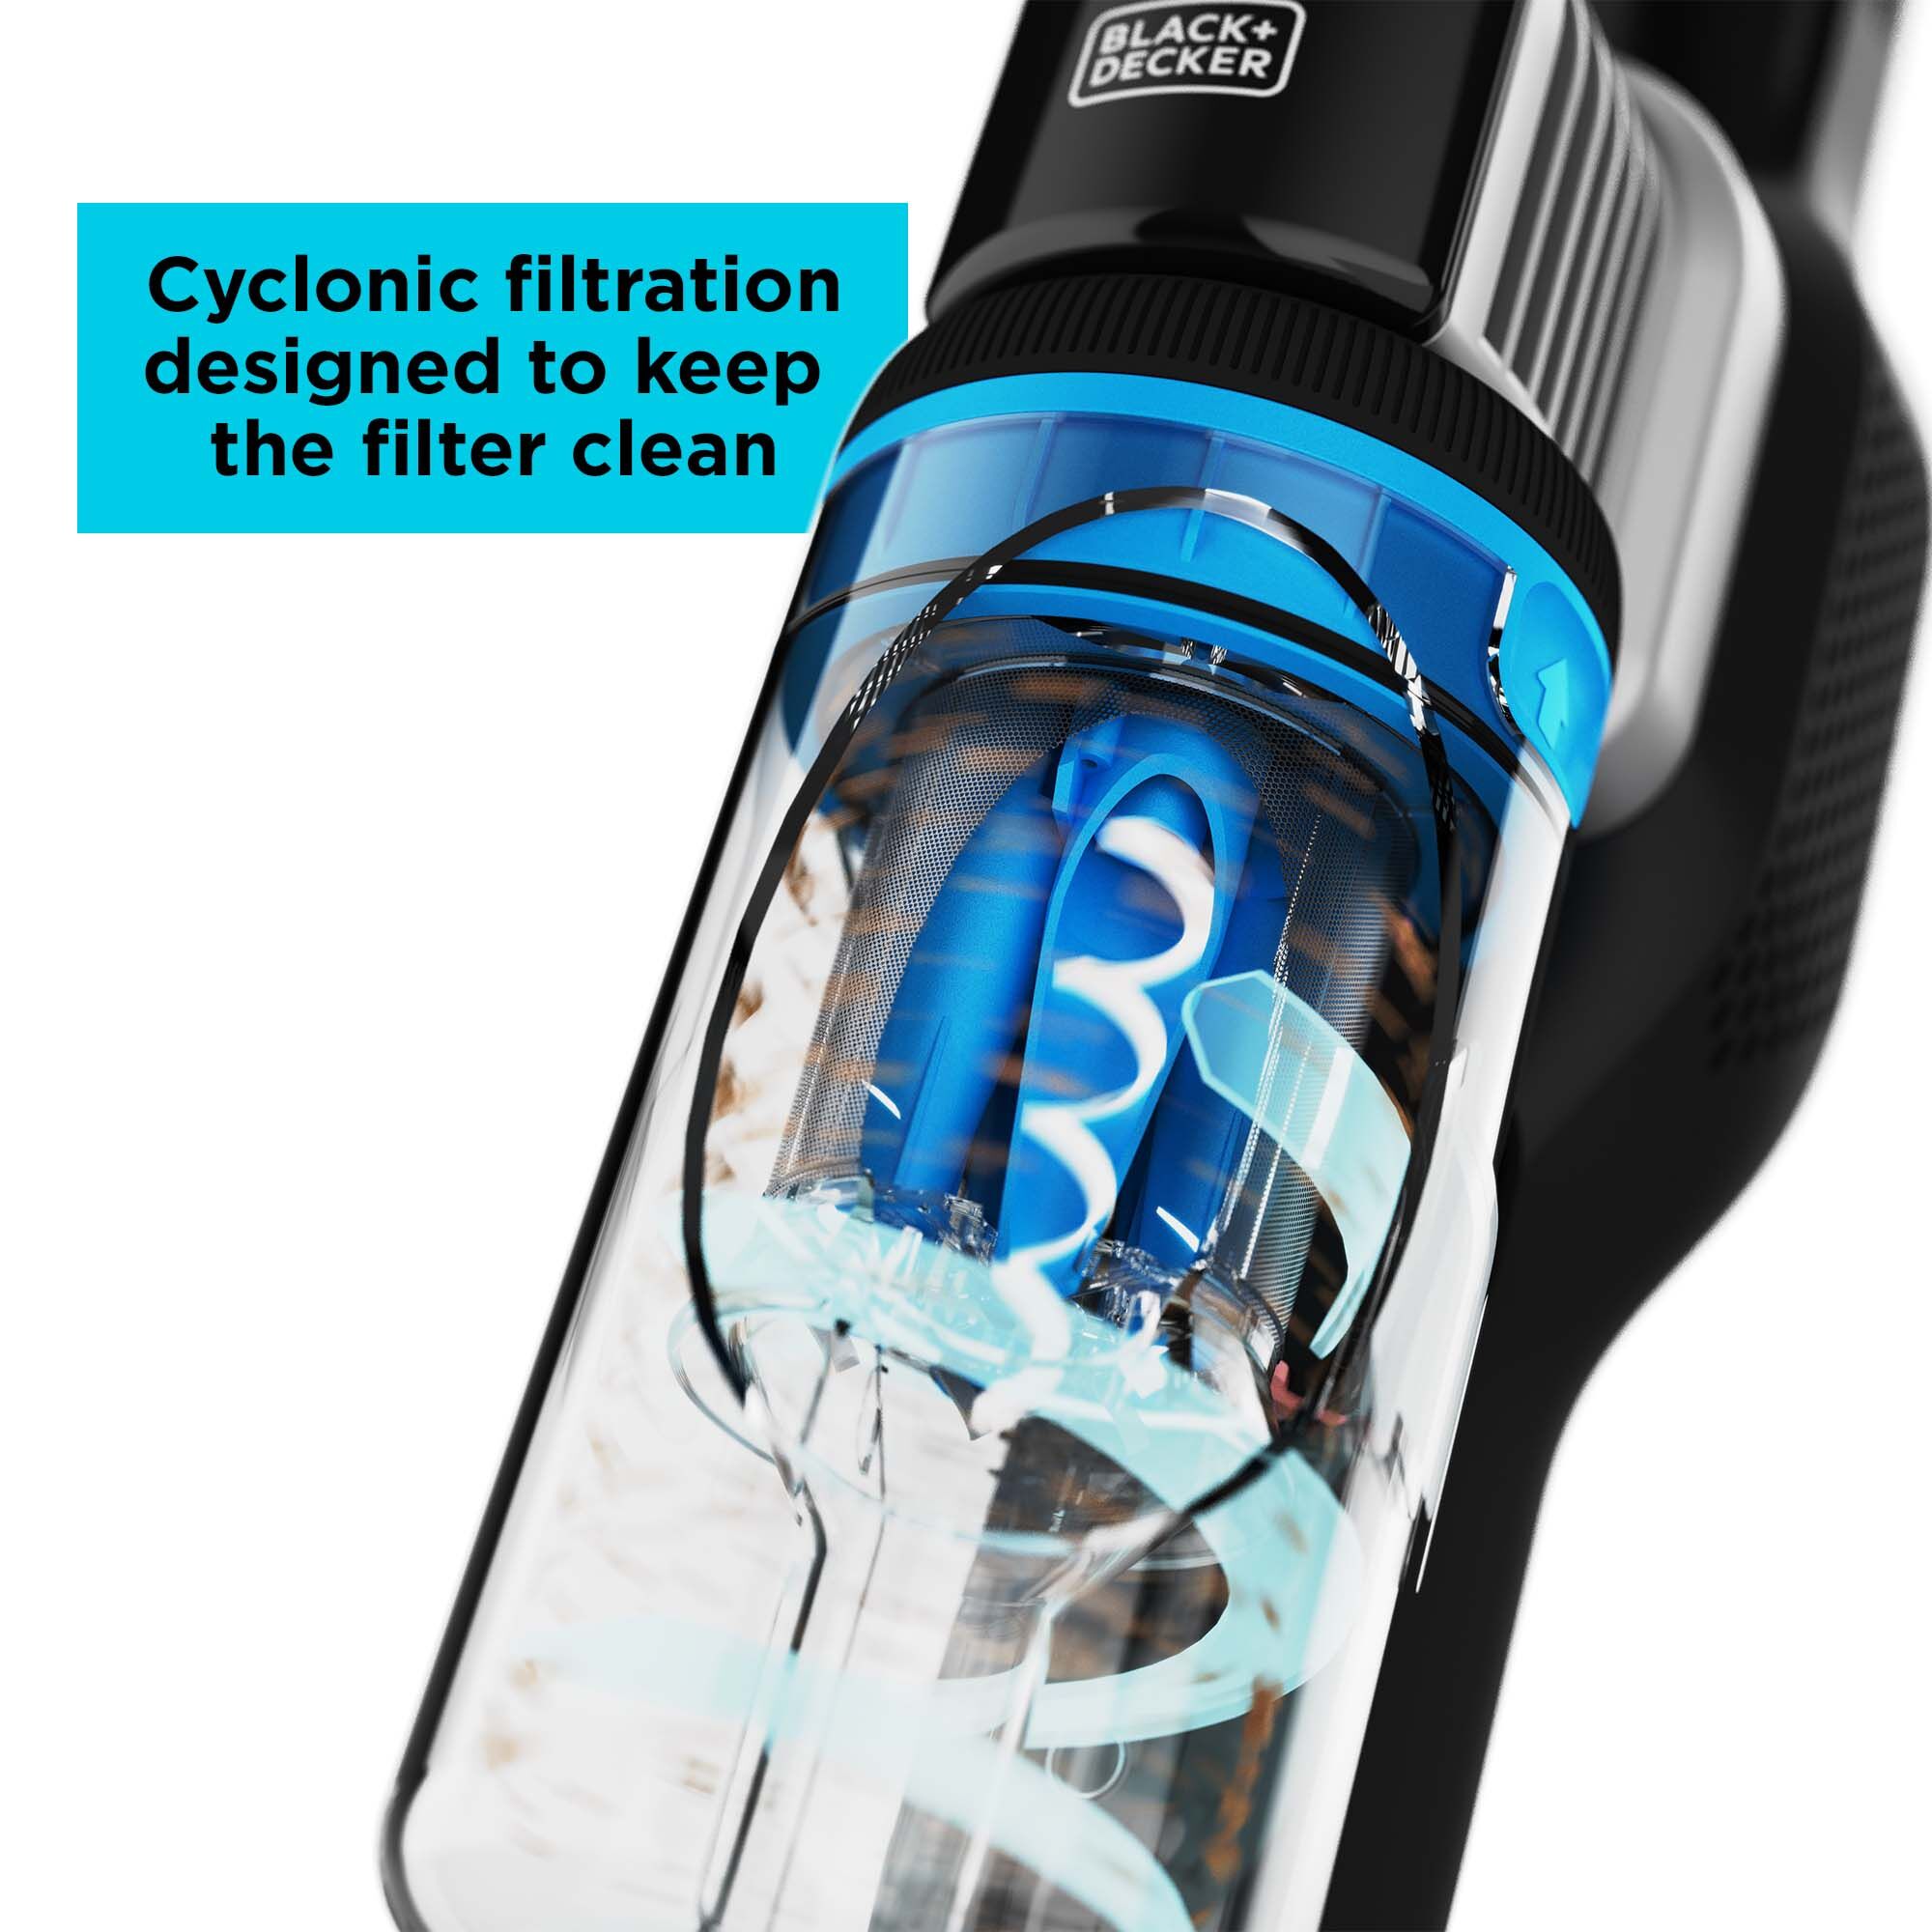 Cyclonic filtration designed to keep the filter clean on the POWERSERIES Extreme MAX stick vac